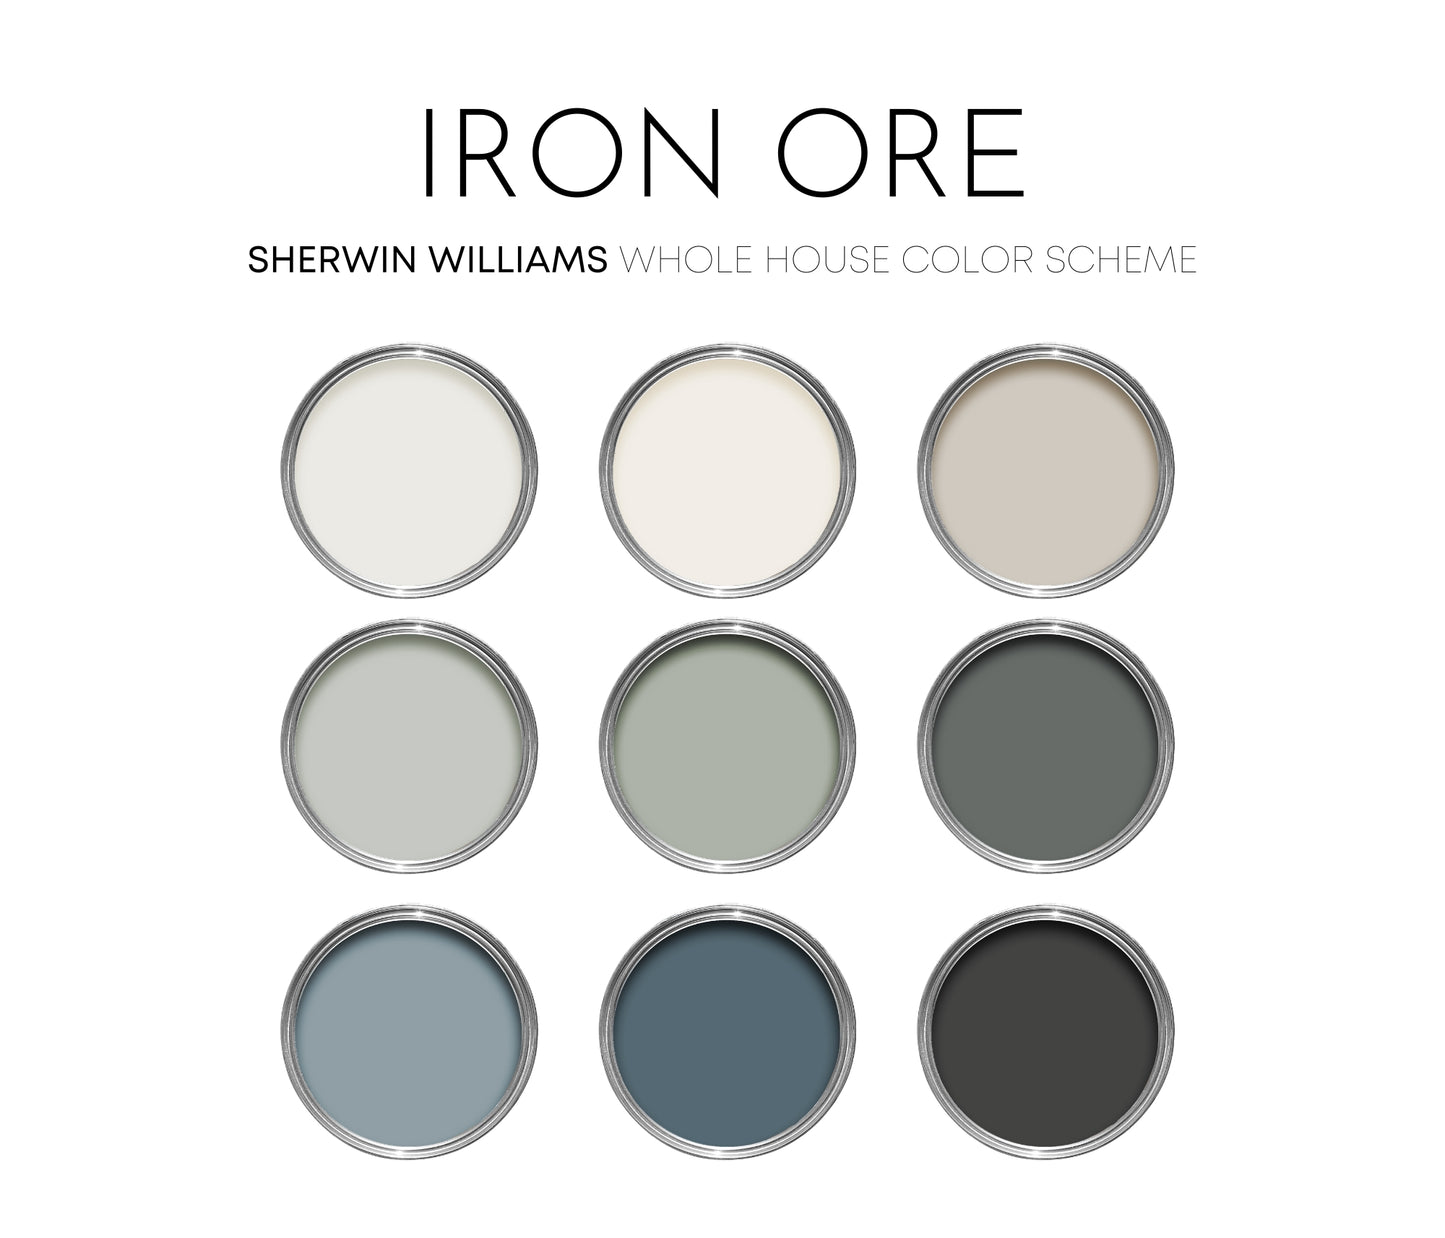 Iron Ore Sherwin Williams Paint Palette, Modern Neutral Interior Paint Colors, Iron Ore Color Scheme, Iron Ore Compliments, Agreeable Gray